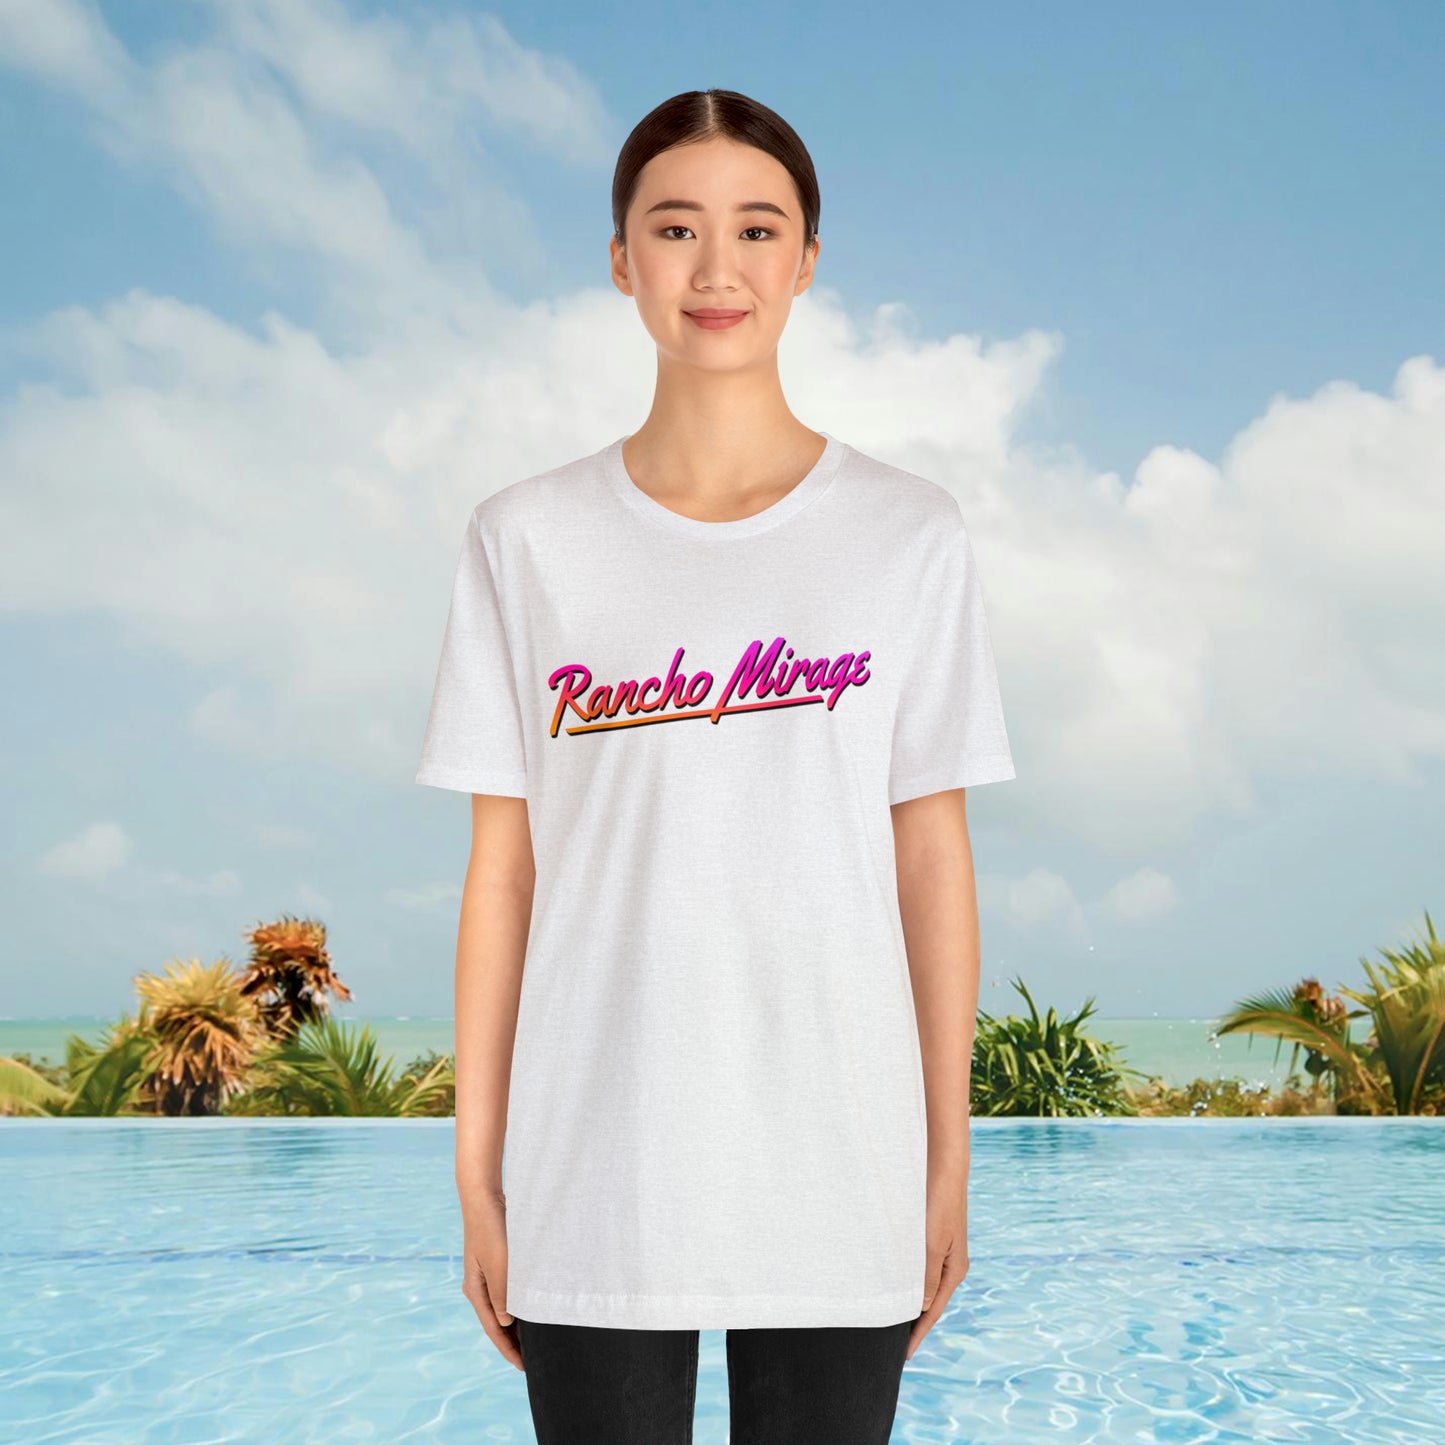 Rancho Mirage Official Tee